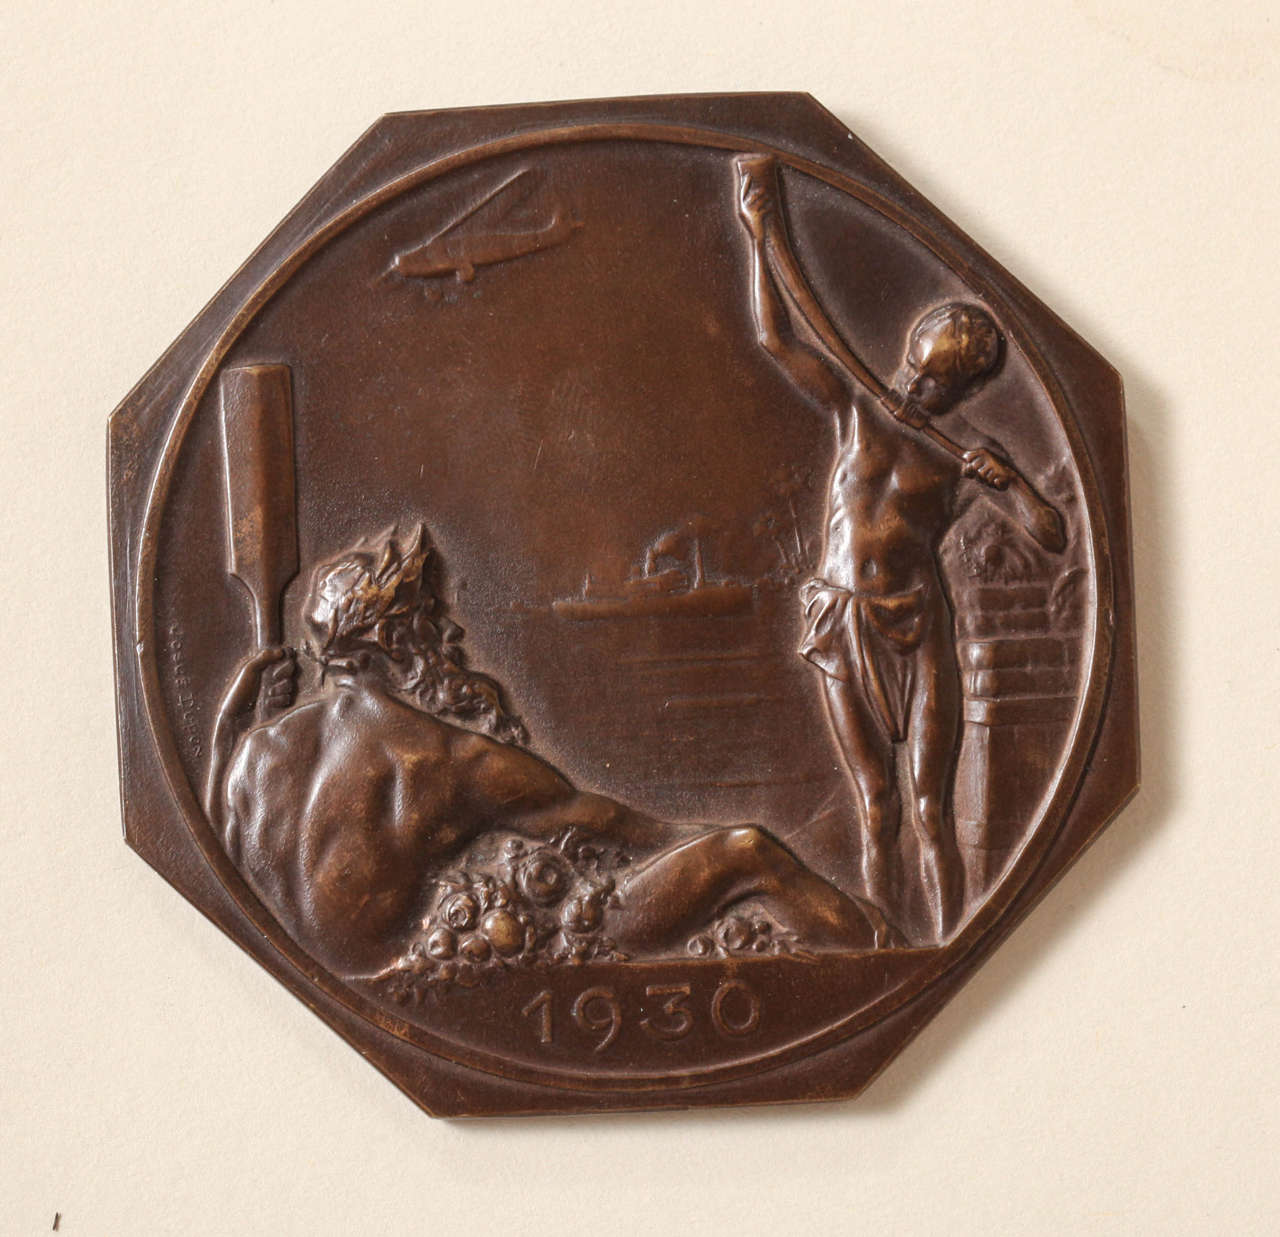 Belgian Art Deco bronze medal in high relief
Commemorating the Exposition Internationale, Antwerp, 1930

Hallmarked J Fonson on edge.
The Fonson Foundry was the major rival to the French Mint, Monnaie de Paris, for decades and produced some of the